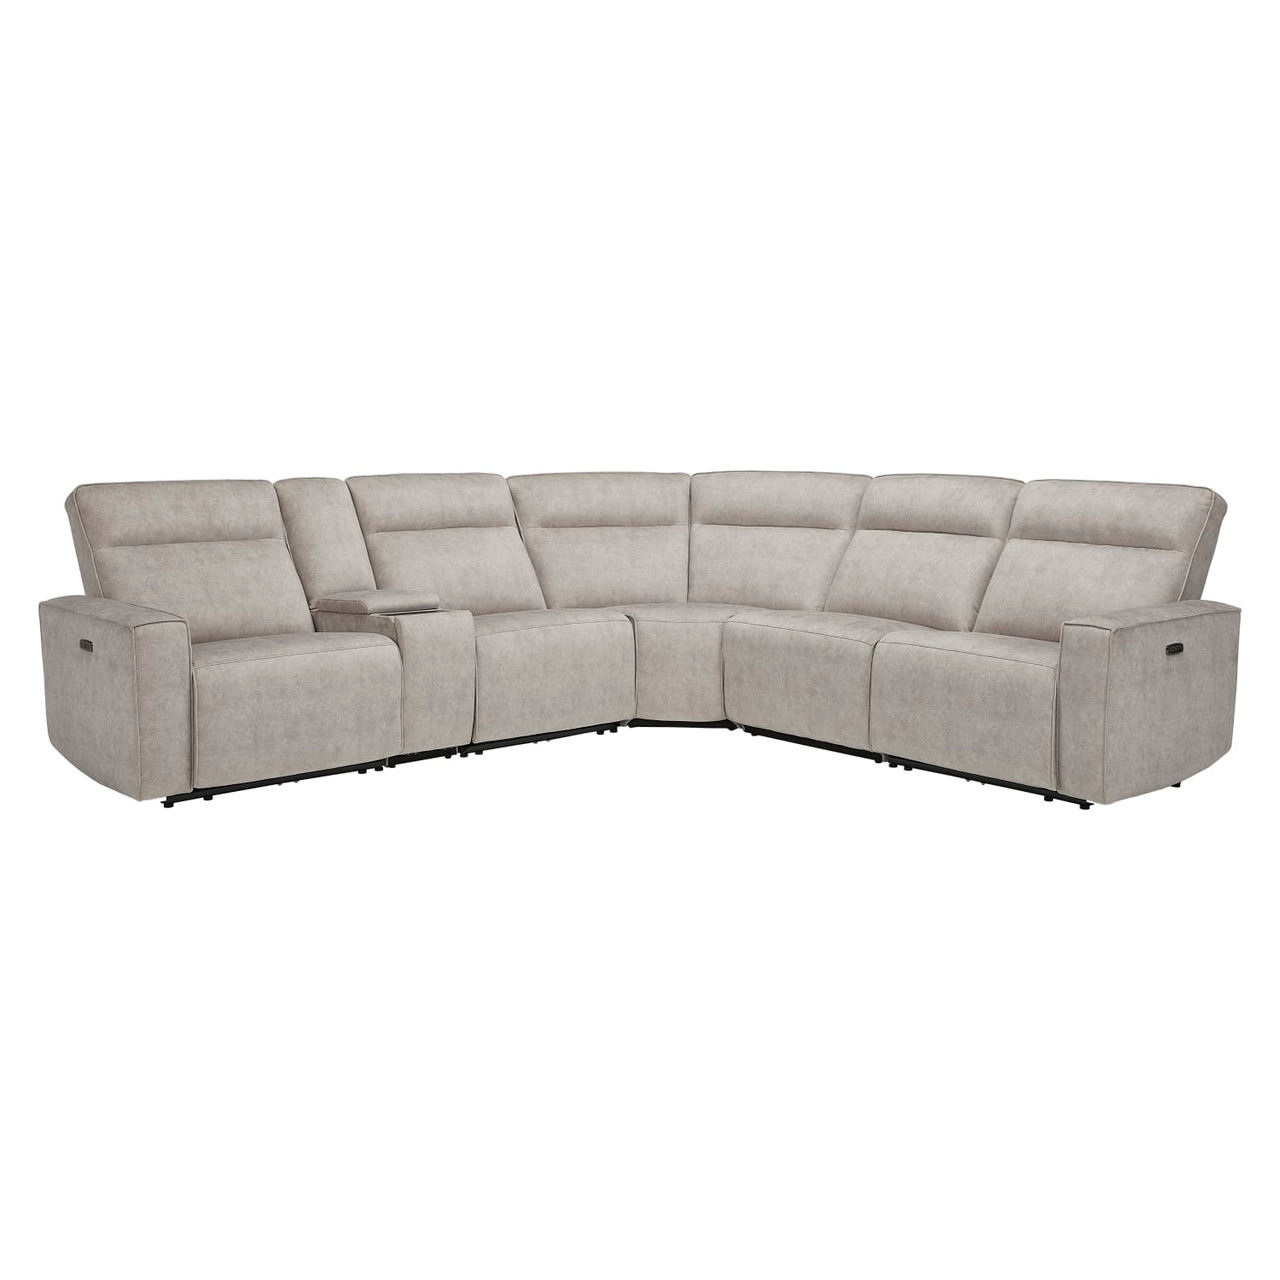 Bedford Park 6-Piece Reclining Sectional